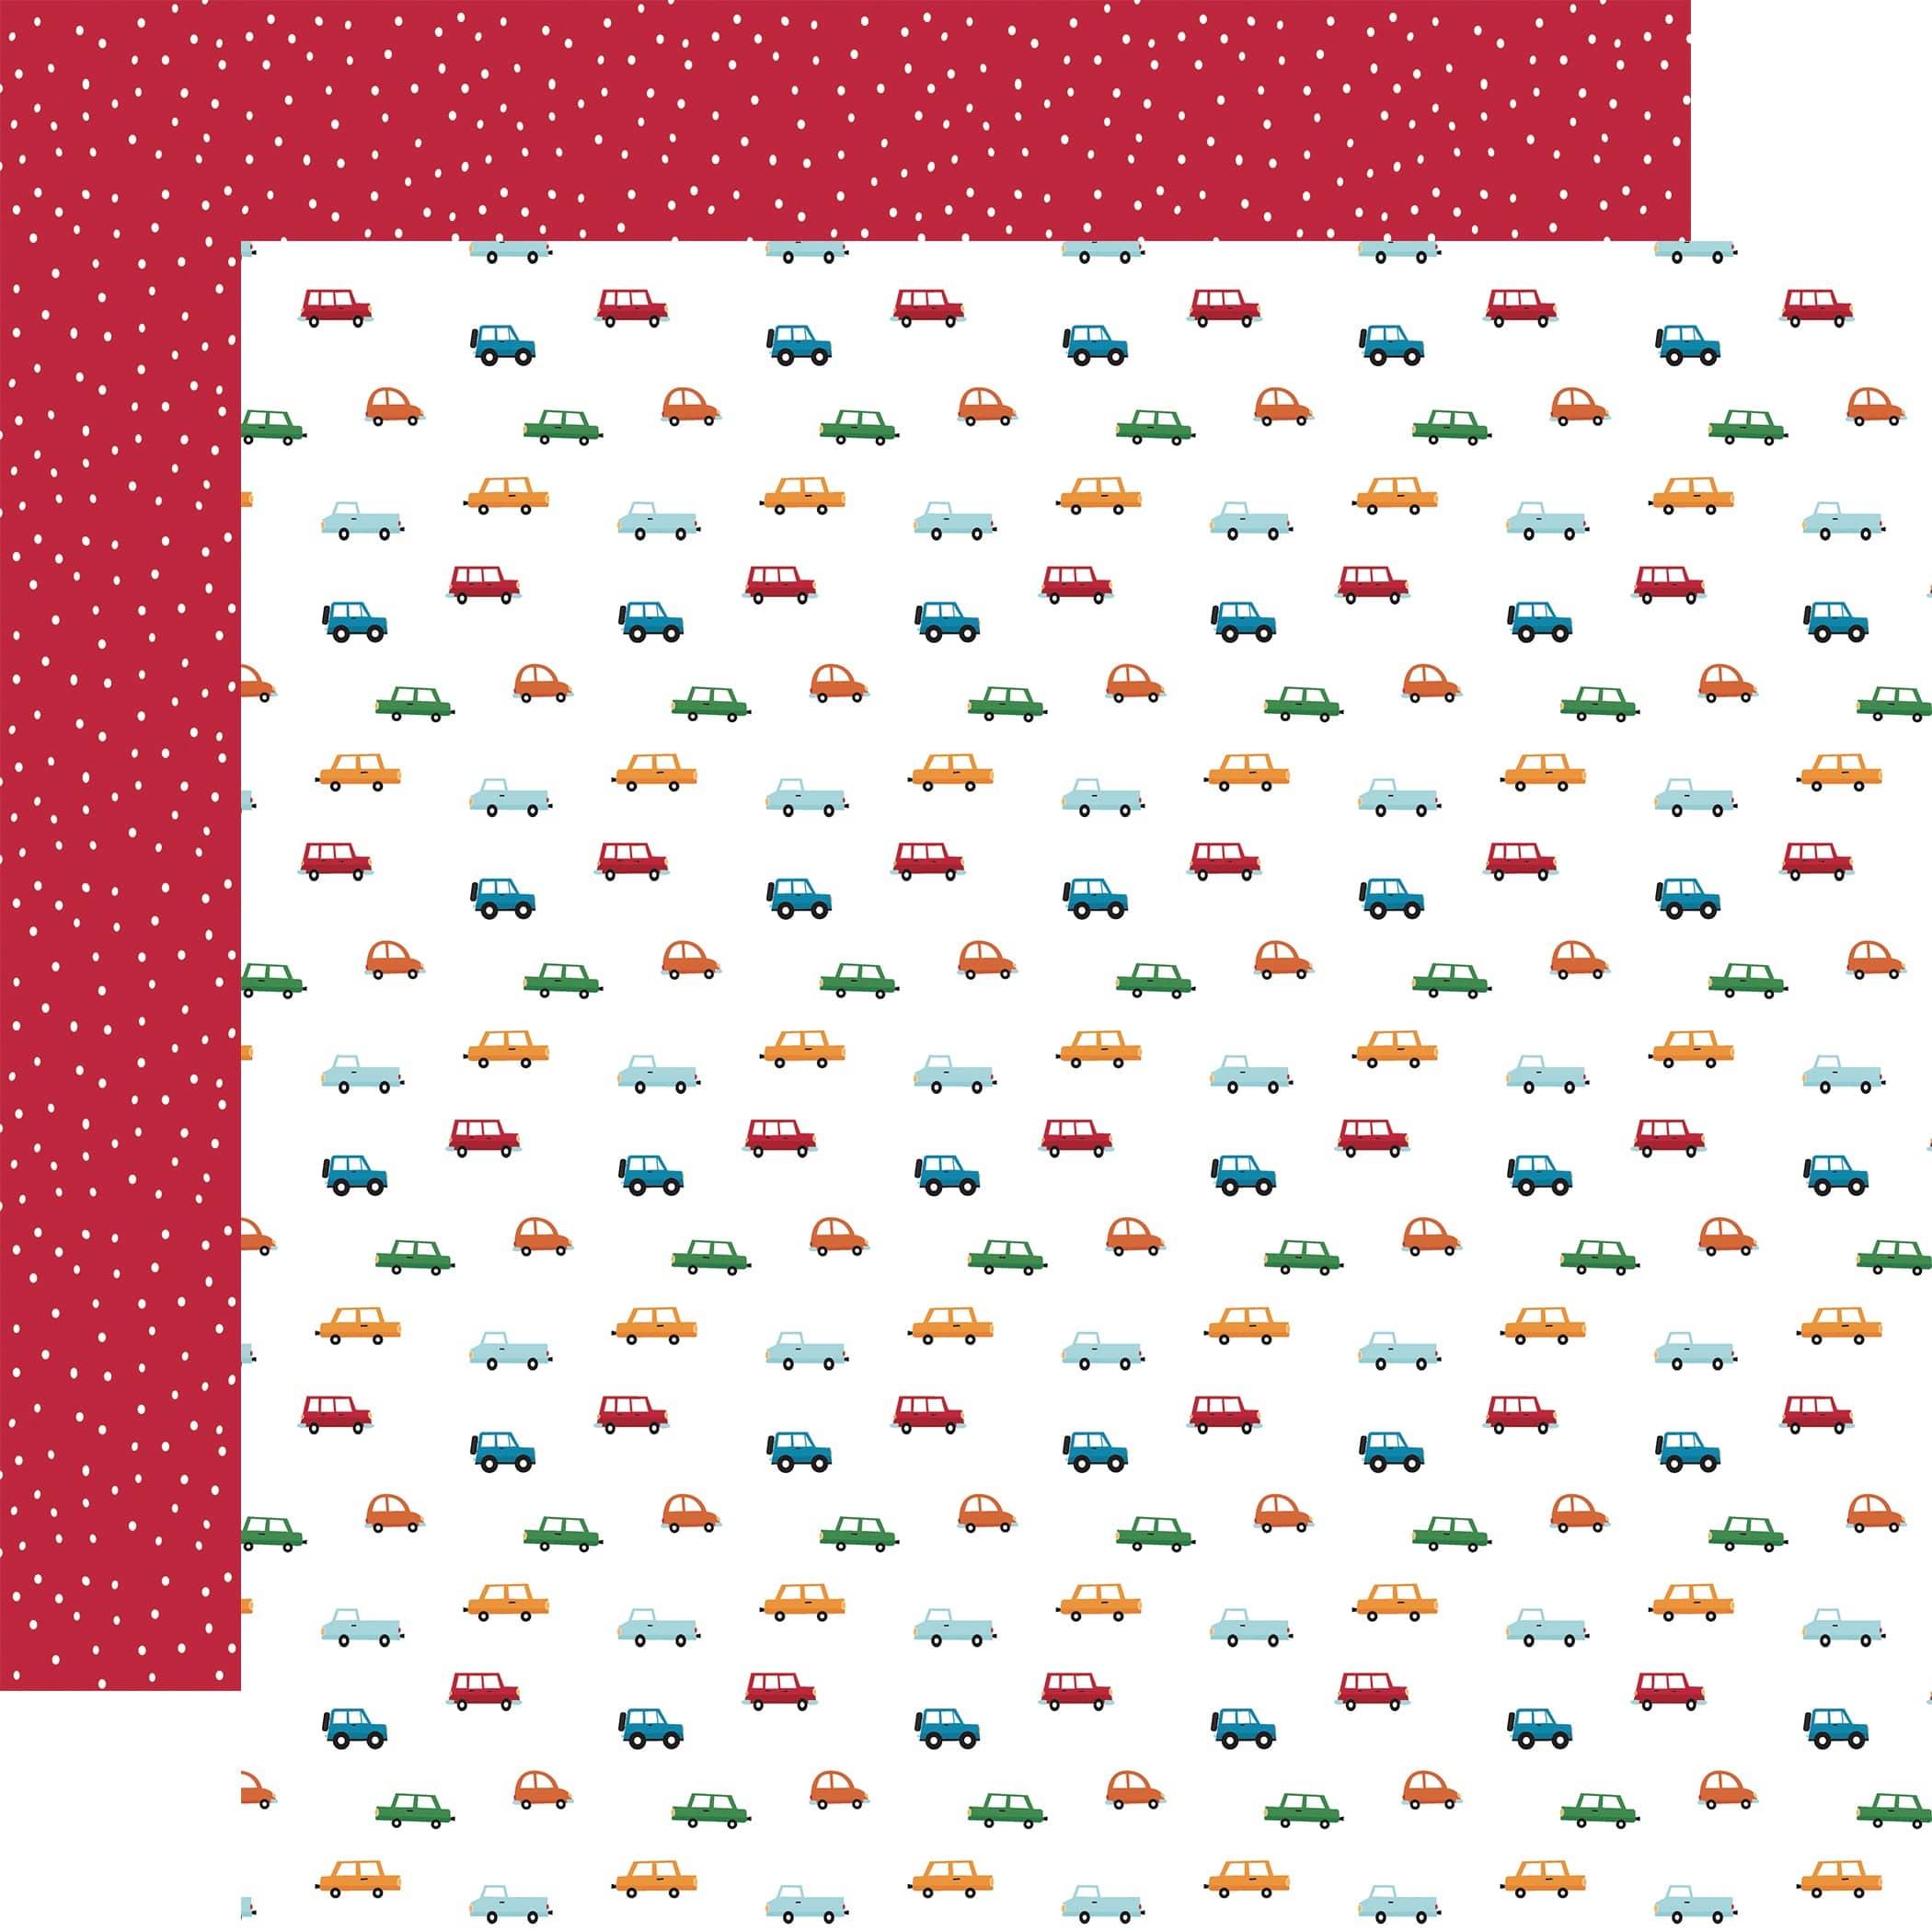 Play All Day Boy Collection Traffic 12 x 12 Double-Sided Scrapbook Paper by Echo Park Paper - Scrapbook Supply Companies